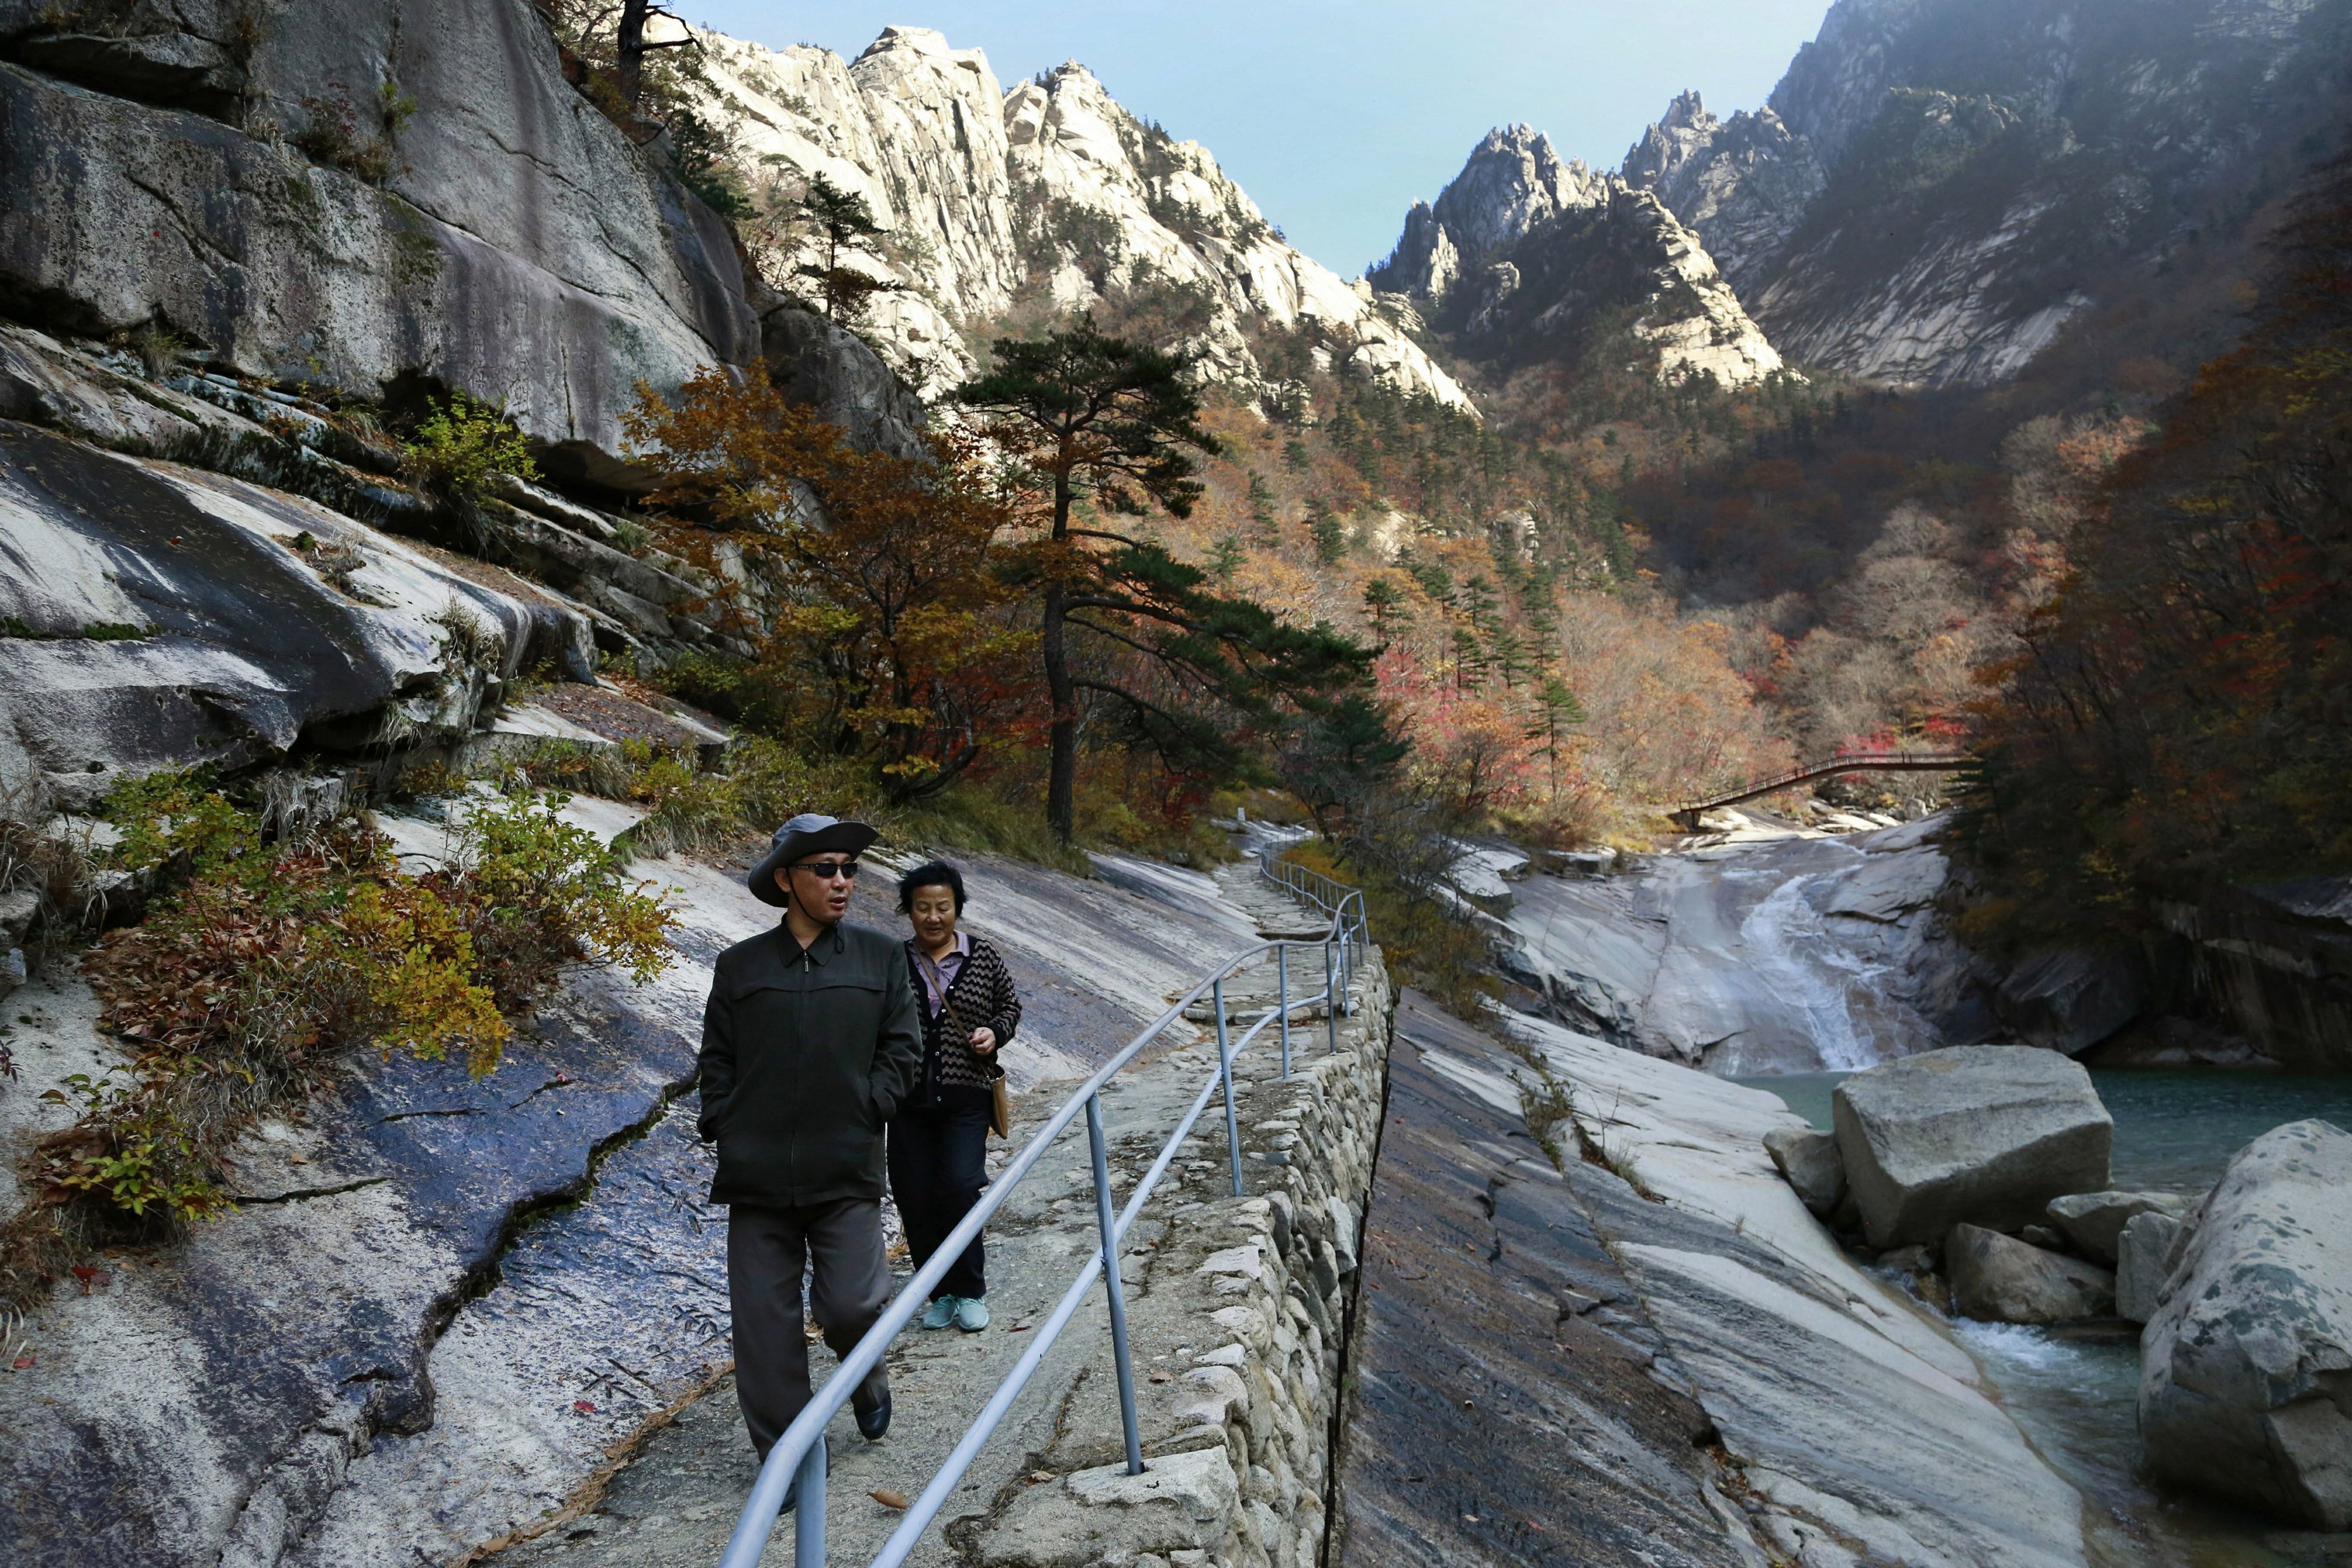 North Korea promises to redevelop the mountain tour site despite the pandemic